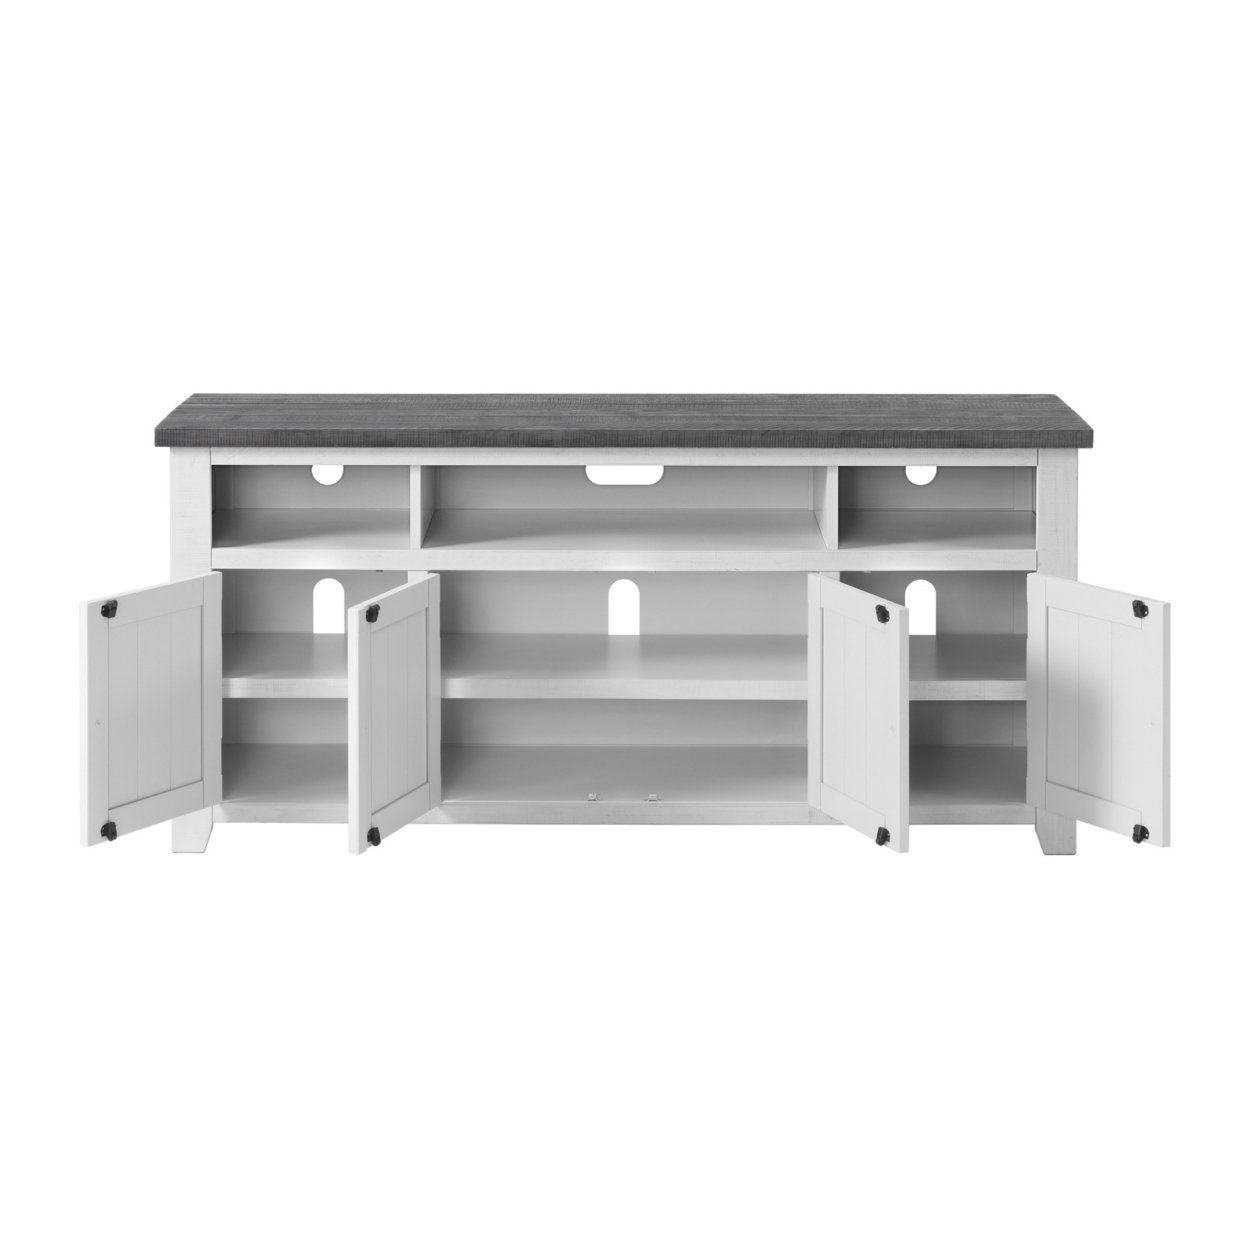 TV Stand With 3 Cabinets And 3 Cubbies, White And Gray- Saltoro Sherpi